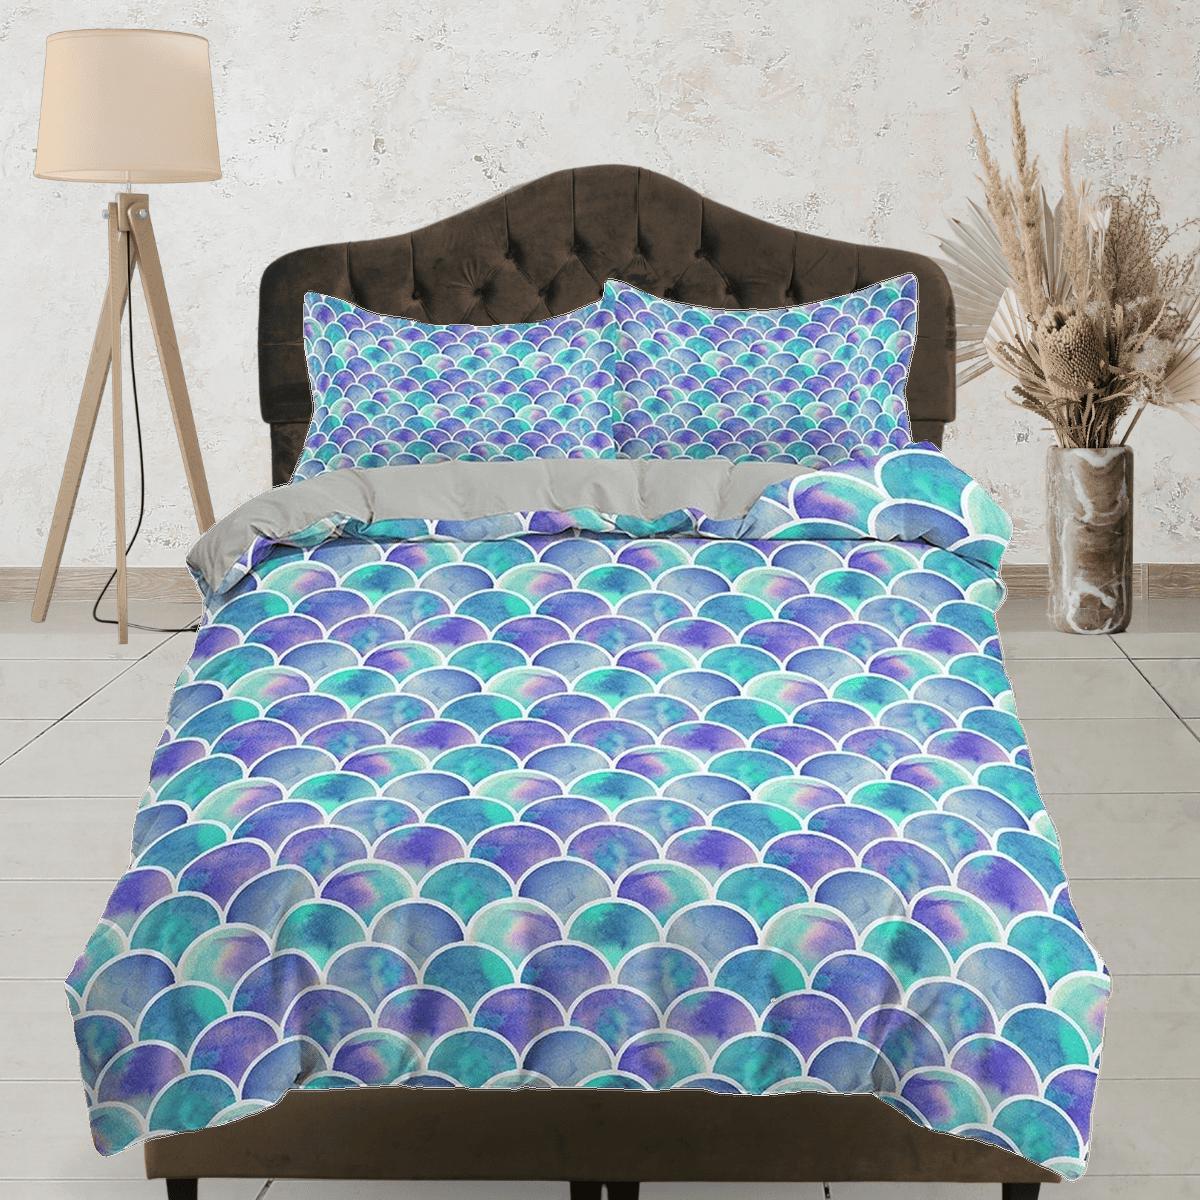 daintyduvet Purple green fish scales colorful toddler bedding, unique duvet cover kids, crib bedding, baby zipper bedding, king queen full twin